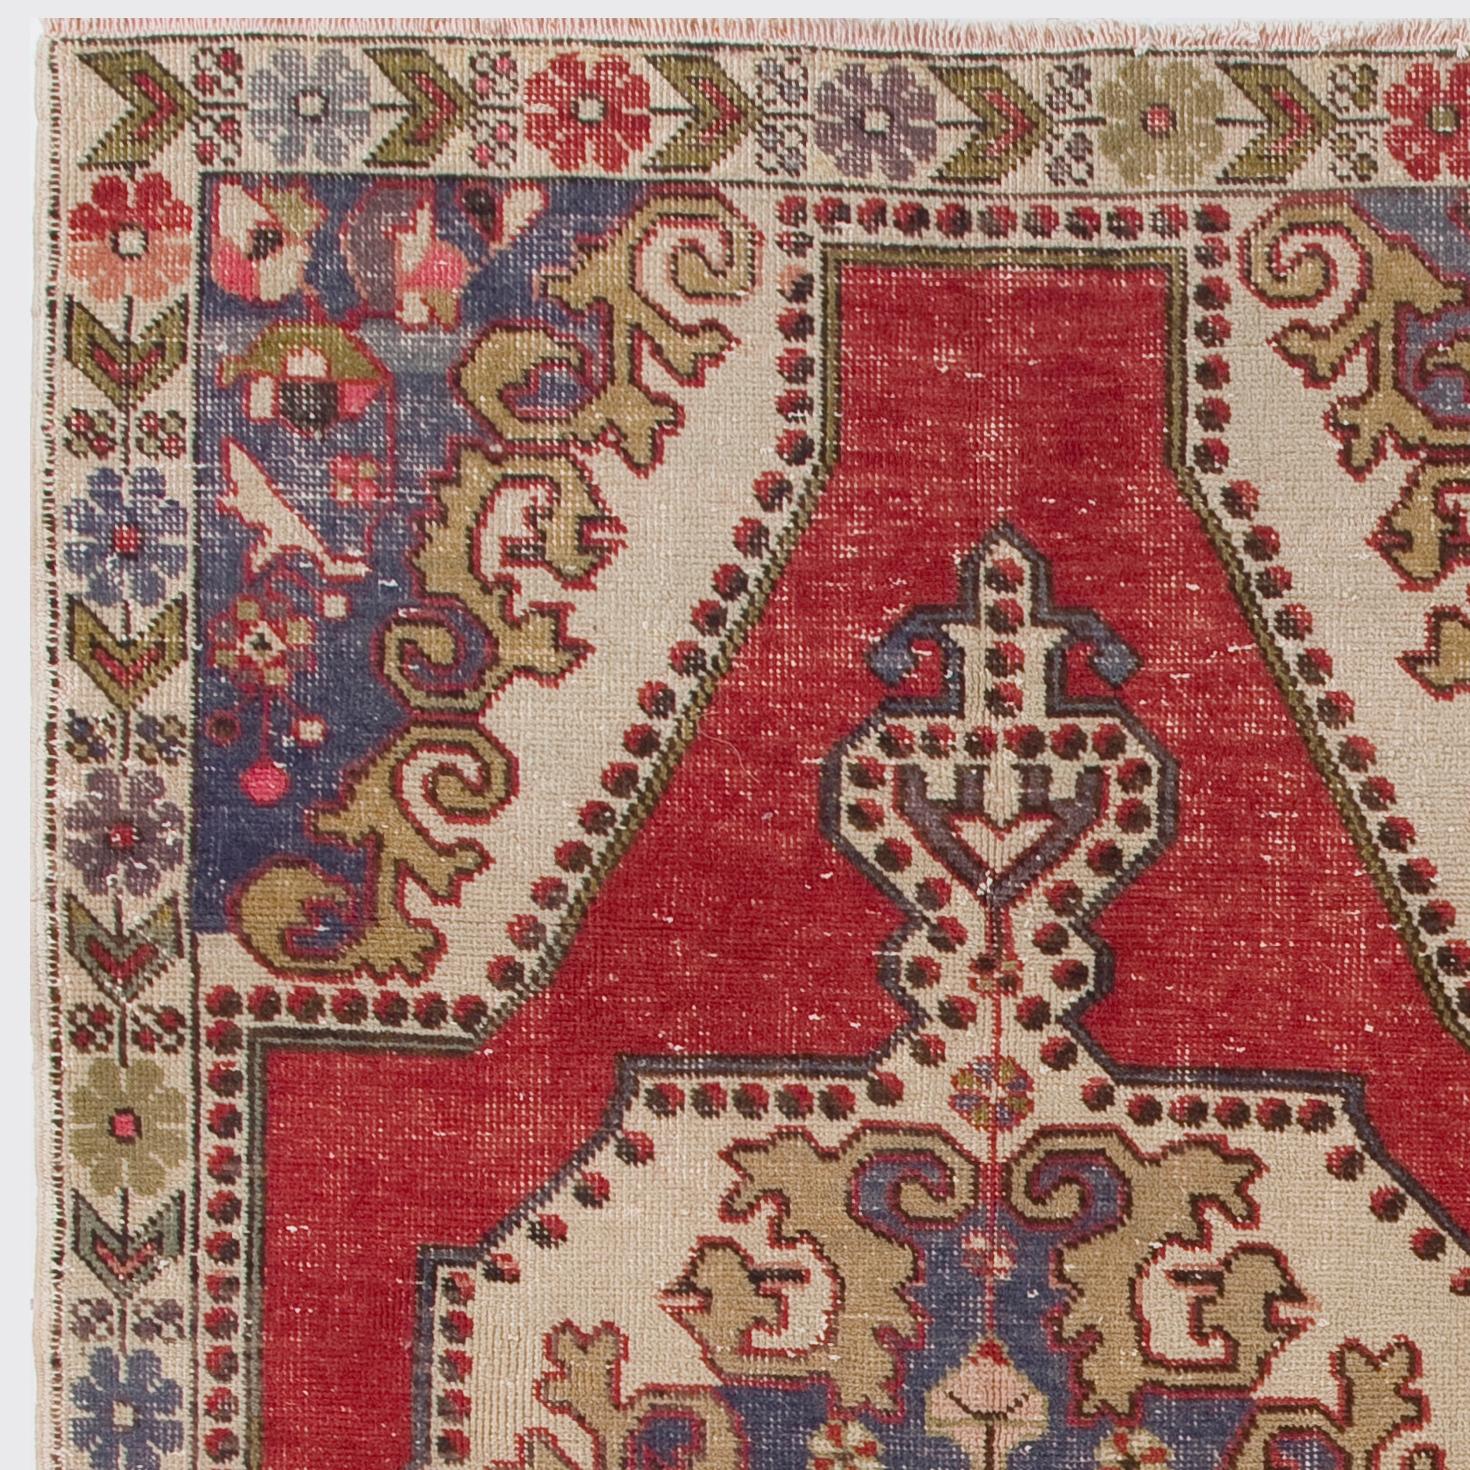 A vintage hand knotted Turkish area rug featuring a large medallion design in ivory at the centre of a key-hole shaped red field. The corner pieces are in ivory and blue and adorned with florals and large swirling leaves. There are navy and red